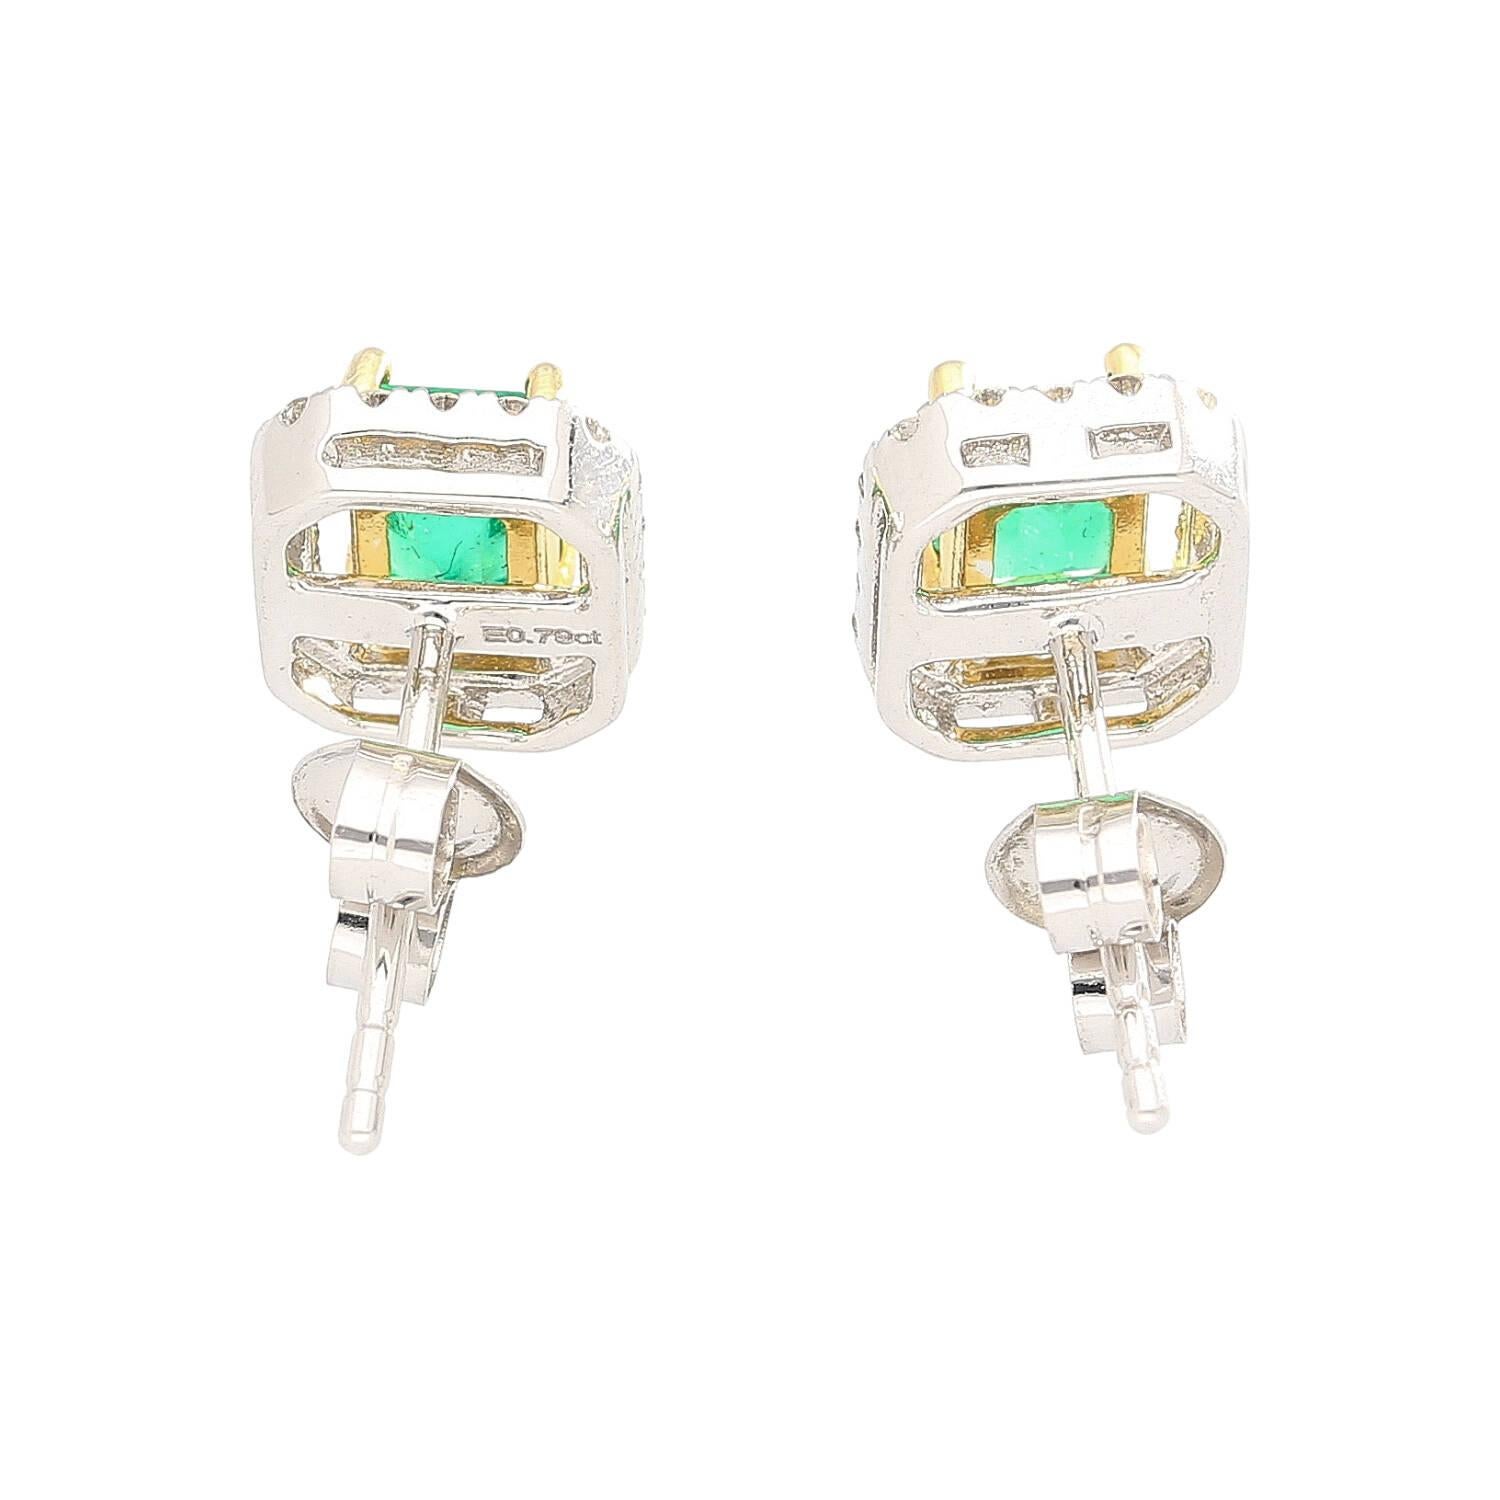 Shop these 0.79 carat emerald cut natural emerald and diamond halo stud earrings in 18k white gold. Mounted with a butterfly push-back closure. These studs feature a gap between the emerald and the diamonds, allowing for the yellow gold prong set